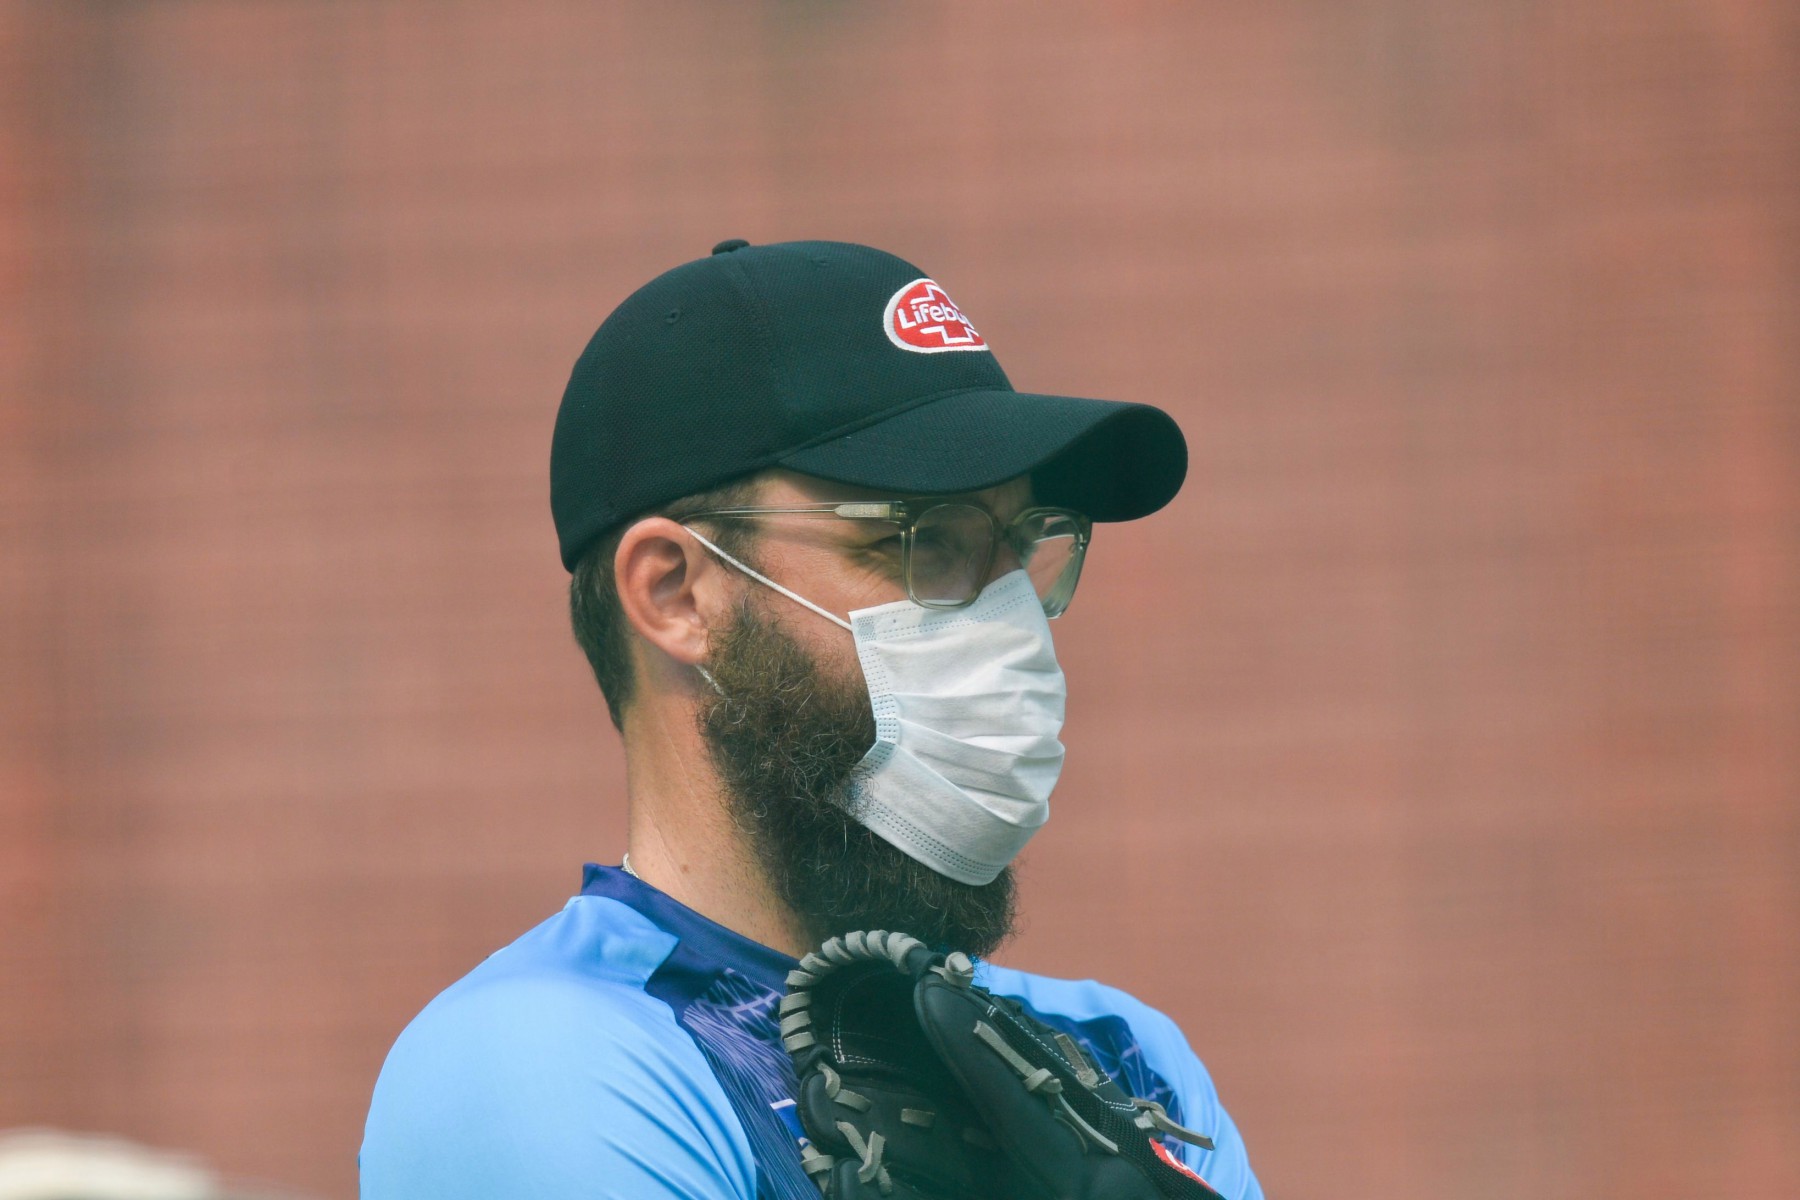 , Cricketers VOMIT on pitch and wear pollution masks in Delhi as killer smog ruins Indias clash vs Bangladesh